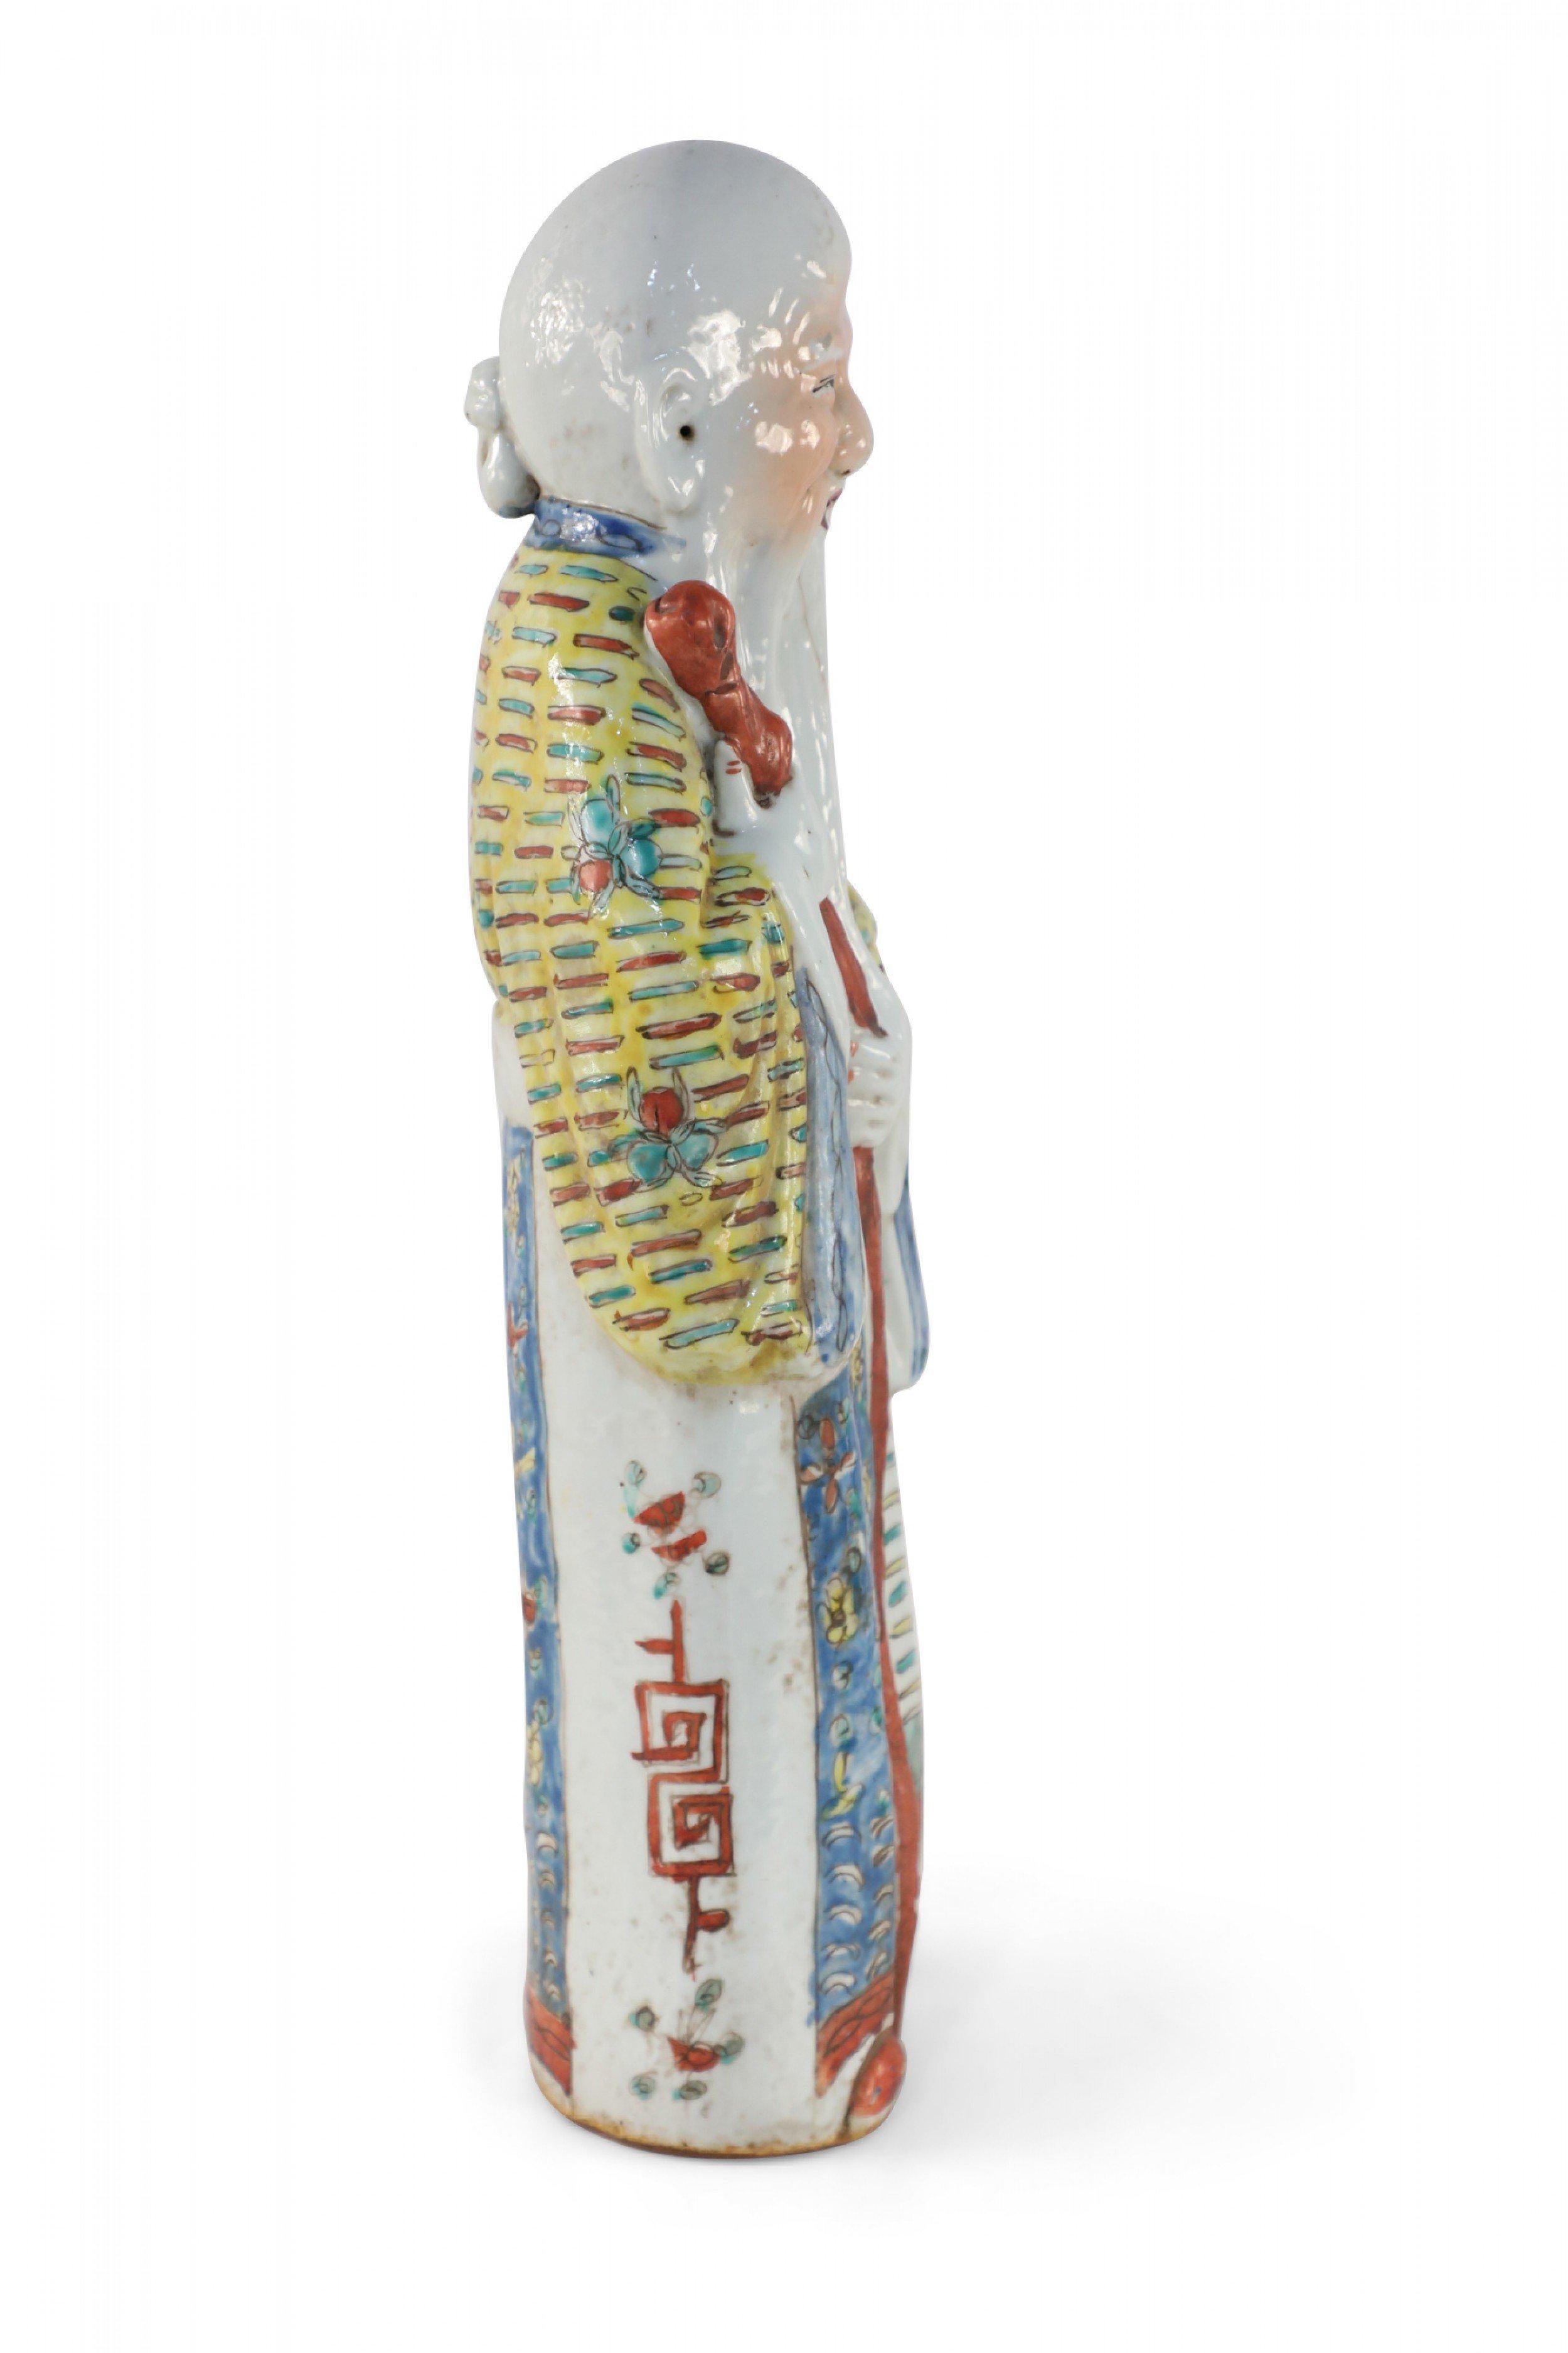 Chinese porcelain figurine with a long beard and raised forehead, clad in yellow and blue robes and holding a staff that symbolizes health and longevity in Taoist Han traditions.
  